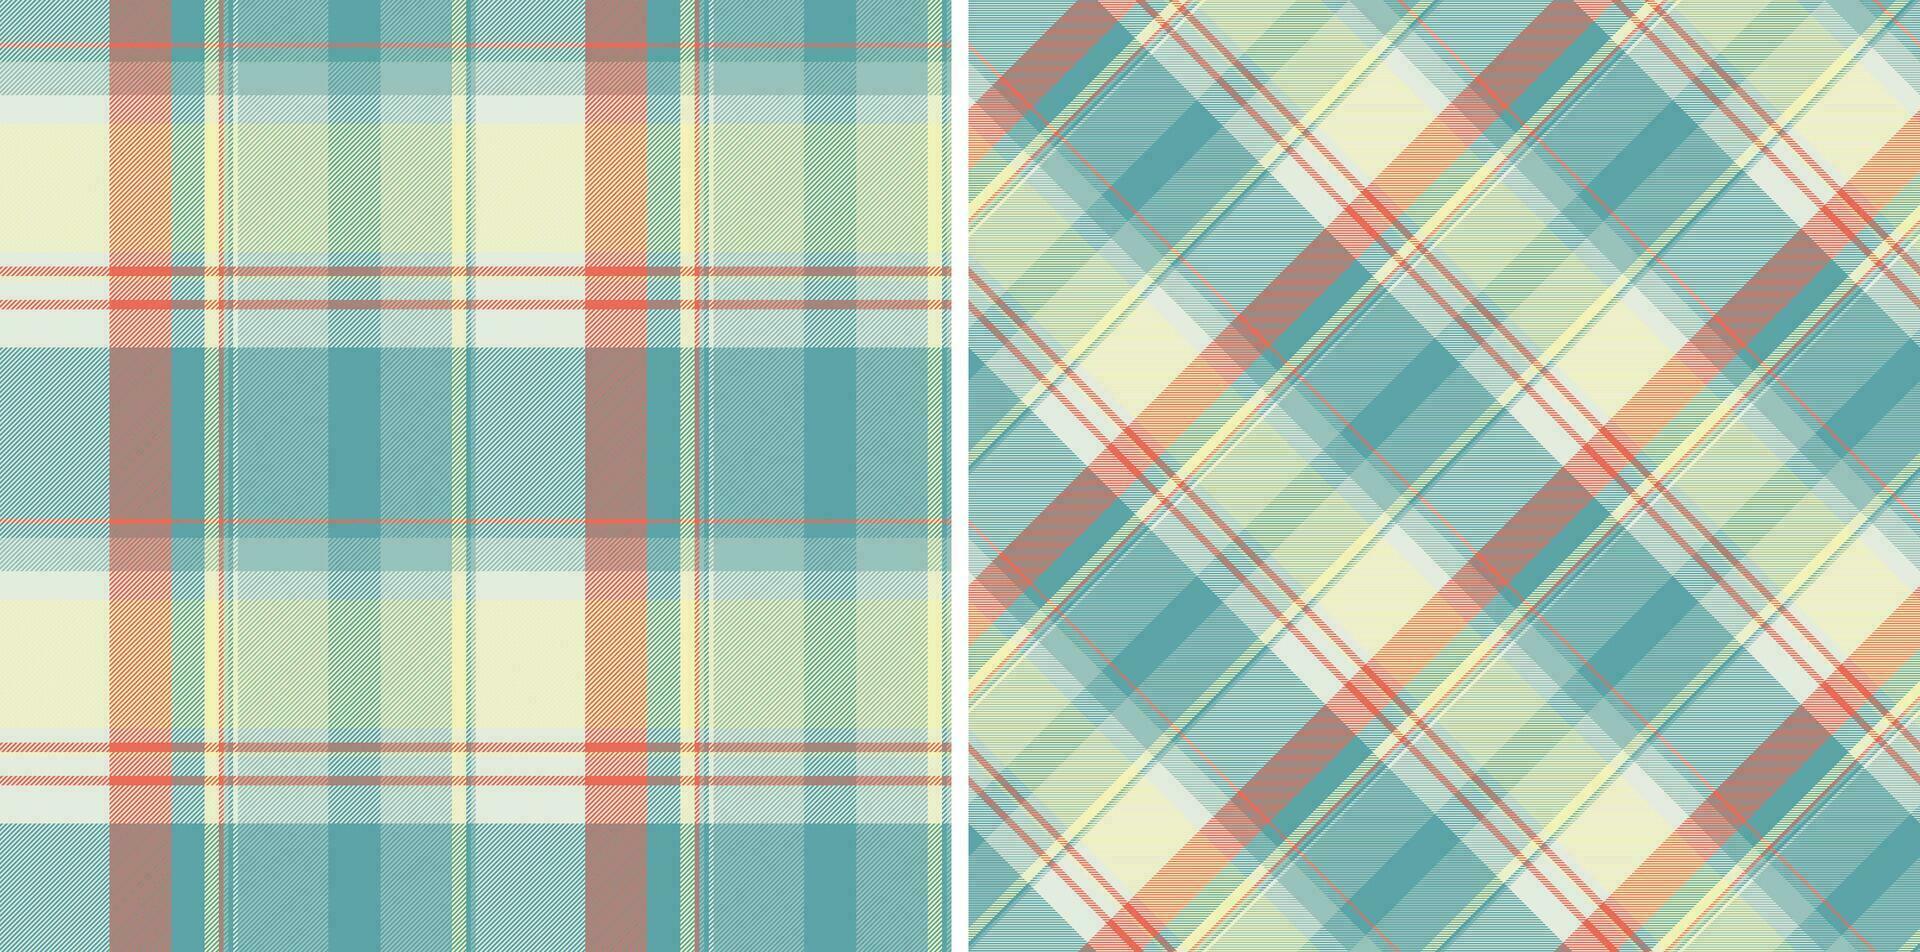 Background vector tartan of fabric check plaid with a seamless texture pattern textile.